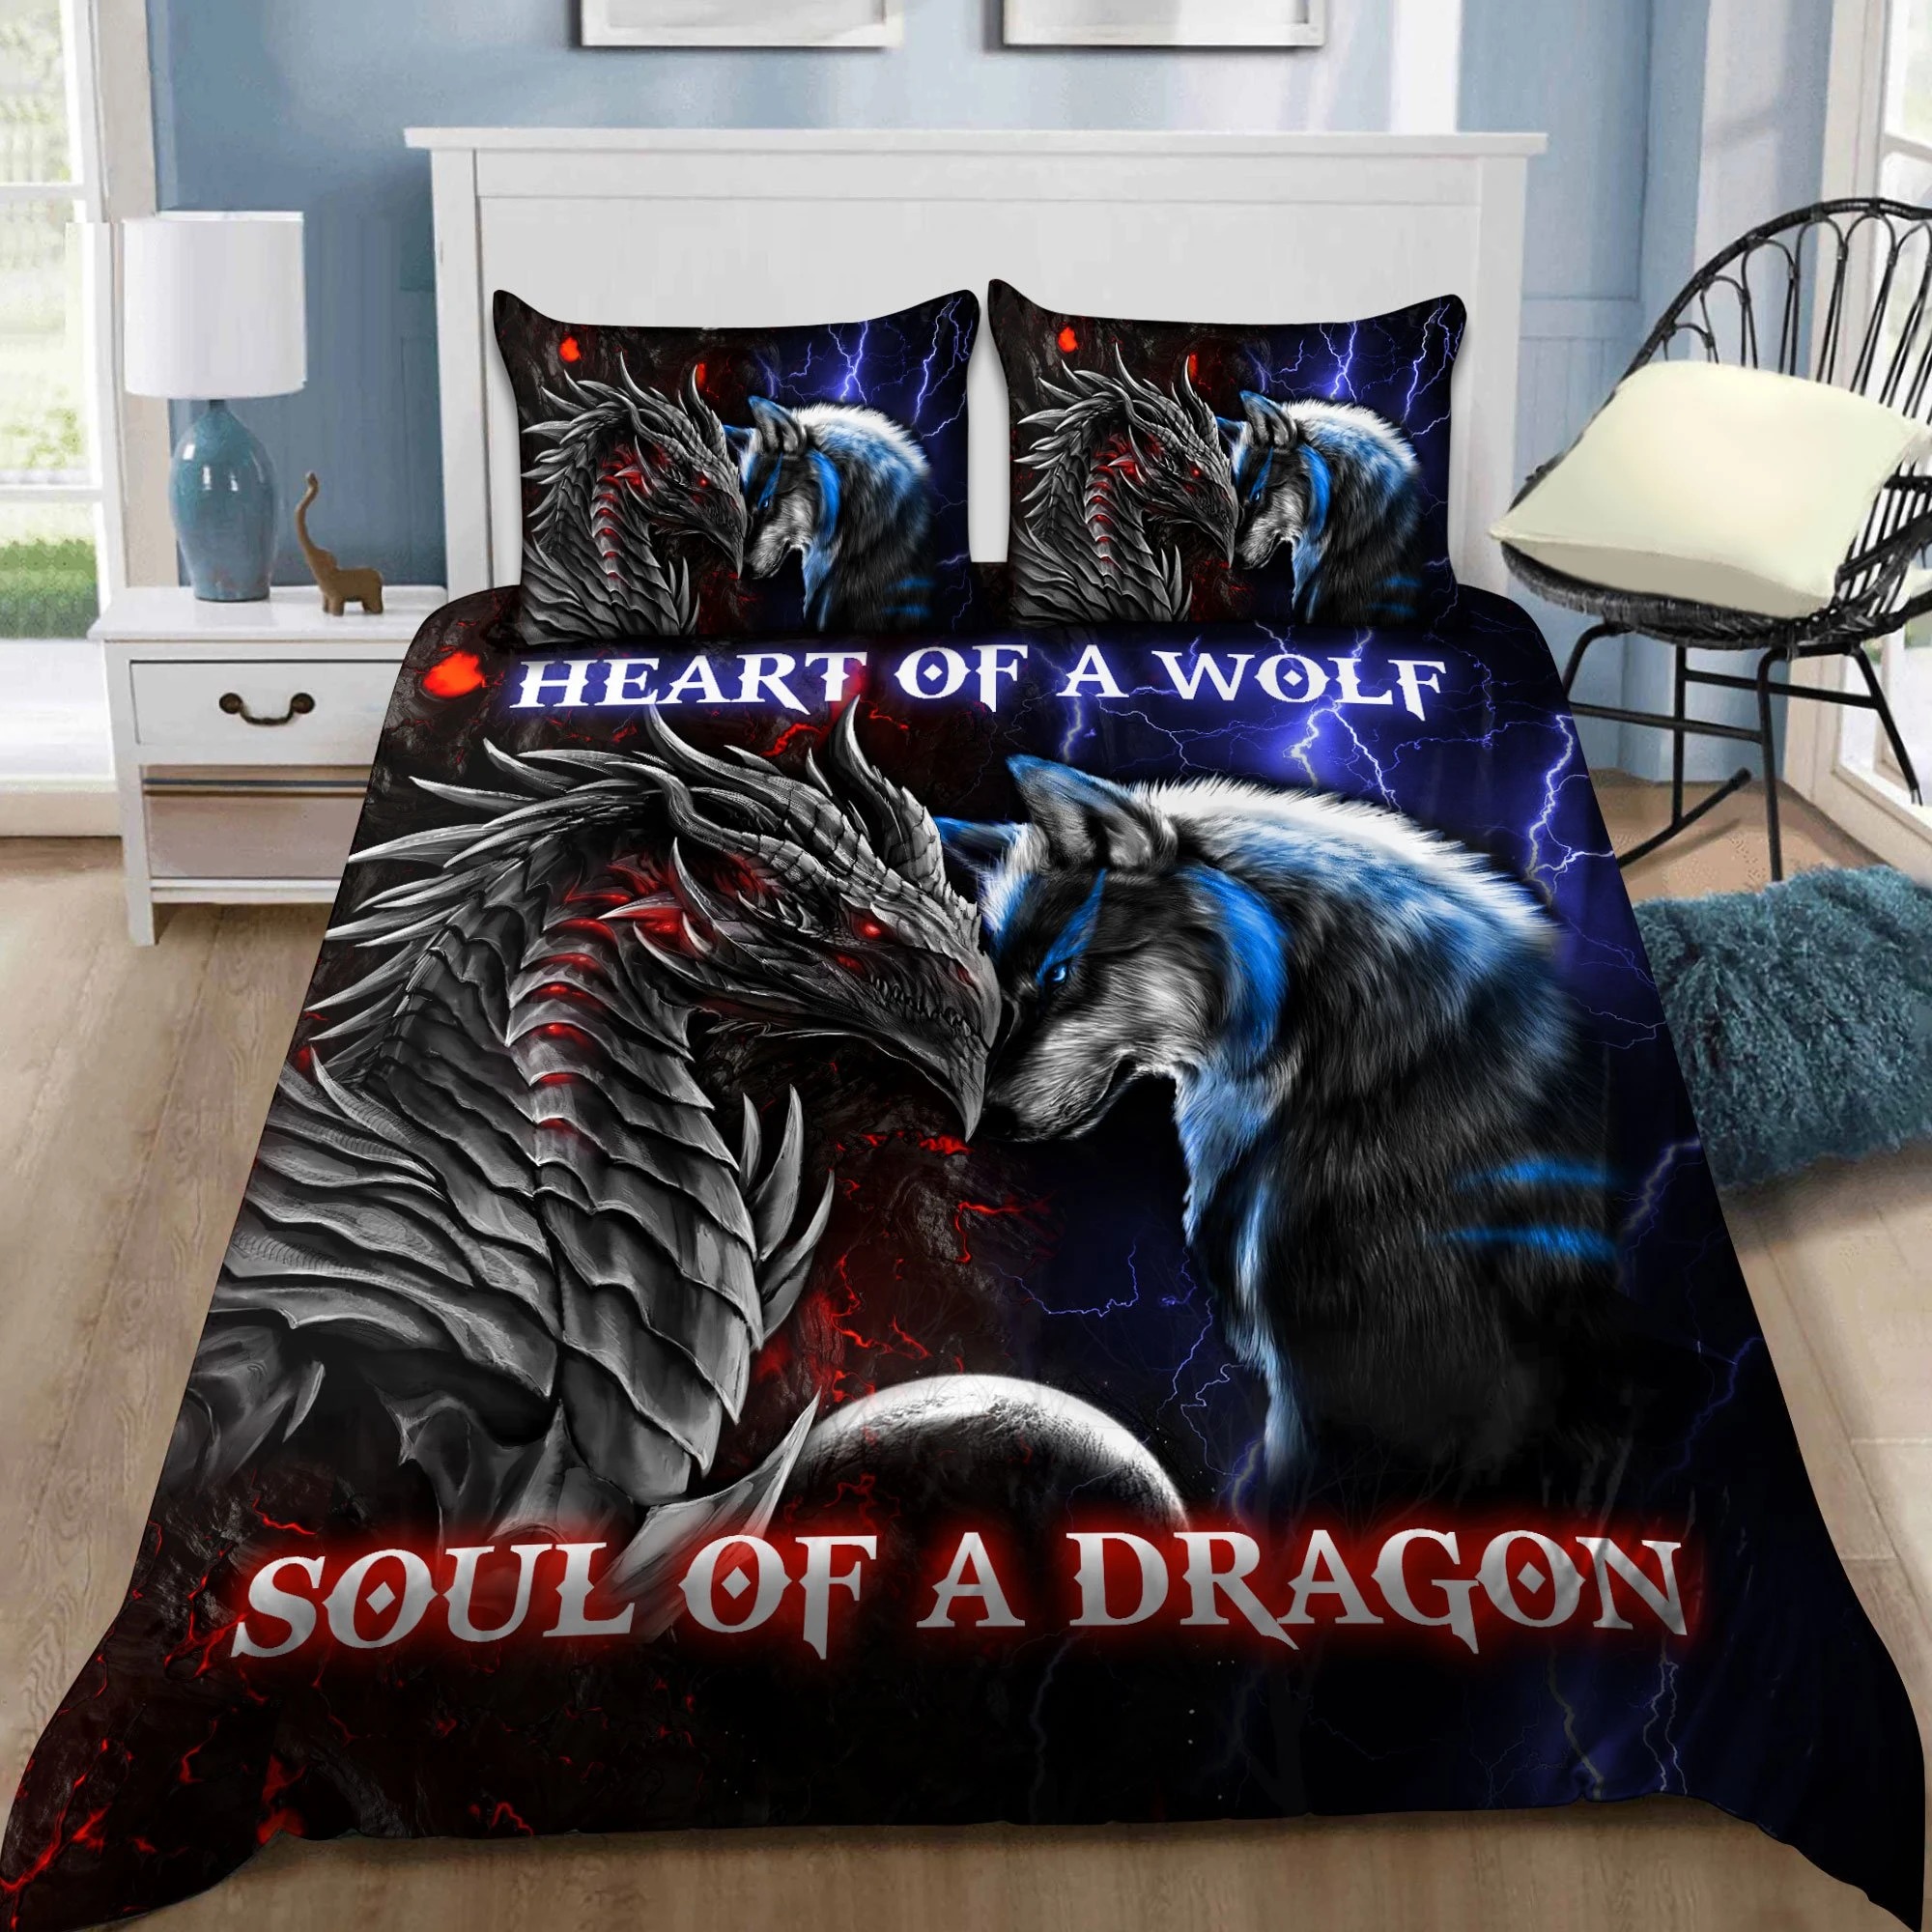 Heart of a wolf soul of a dragon bedding set – Hothot 290321